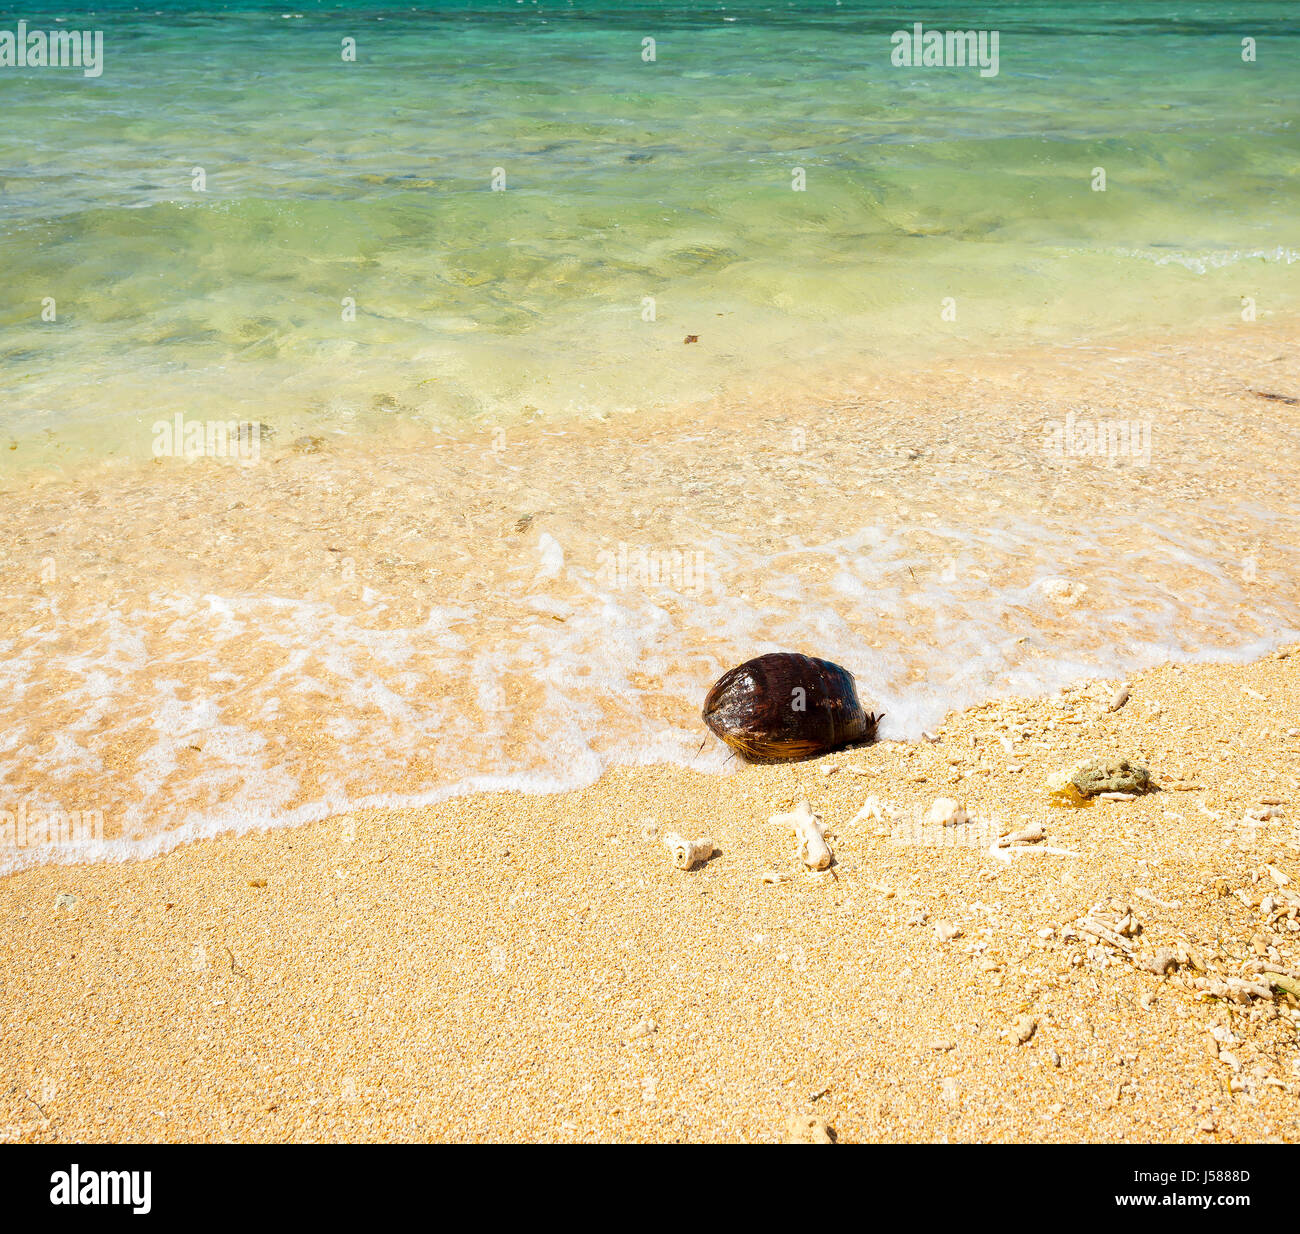 Hot summer beach scene in tropical Noumea with coconut shell on sand Stock Photo